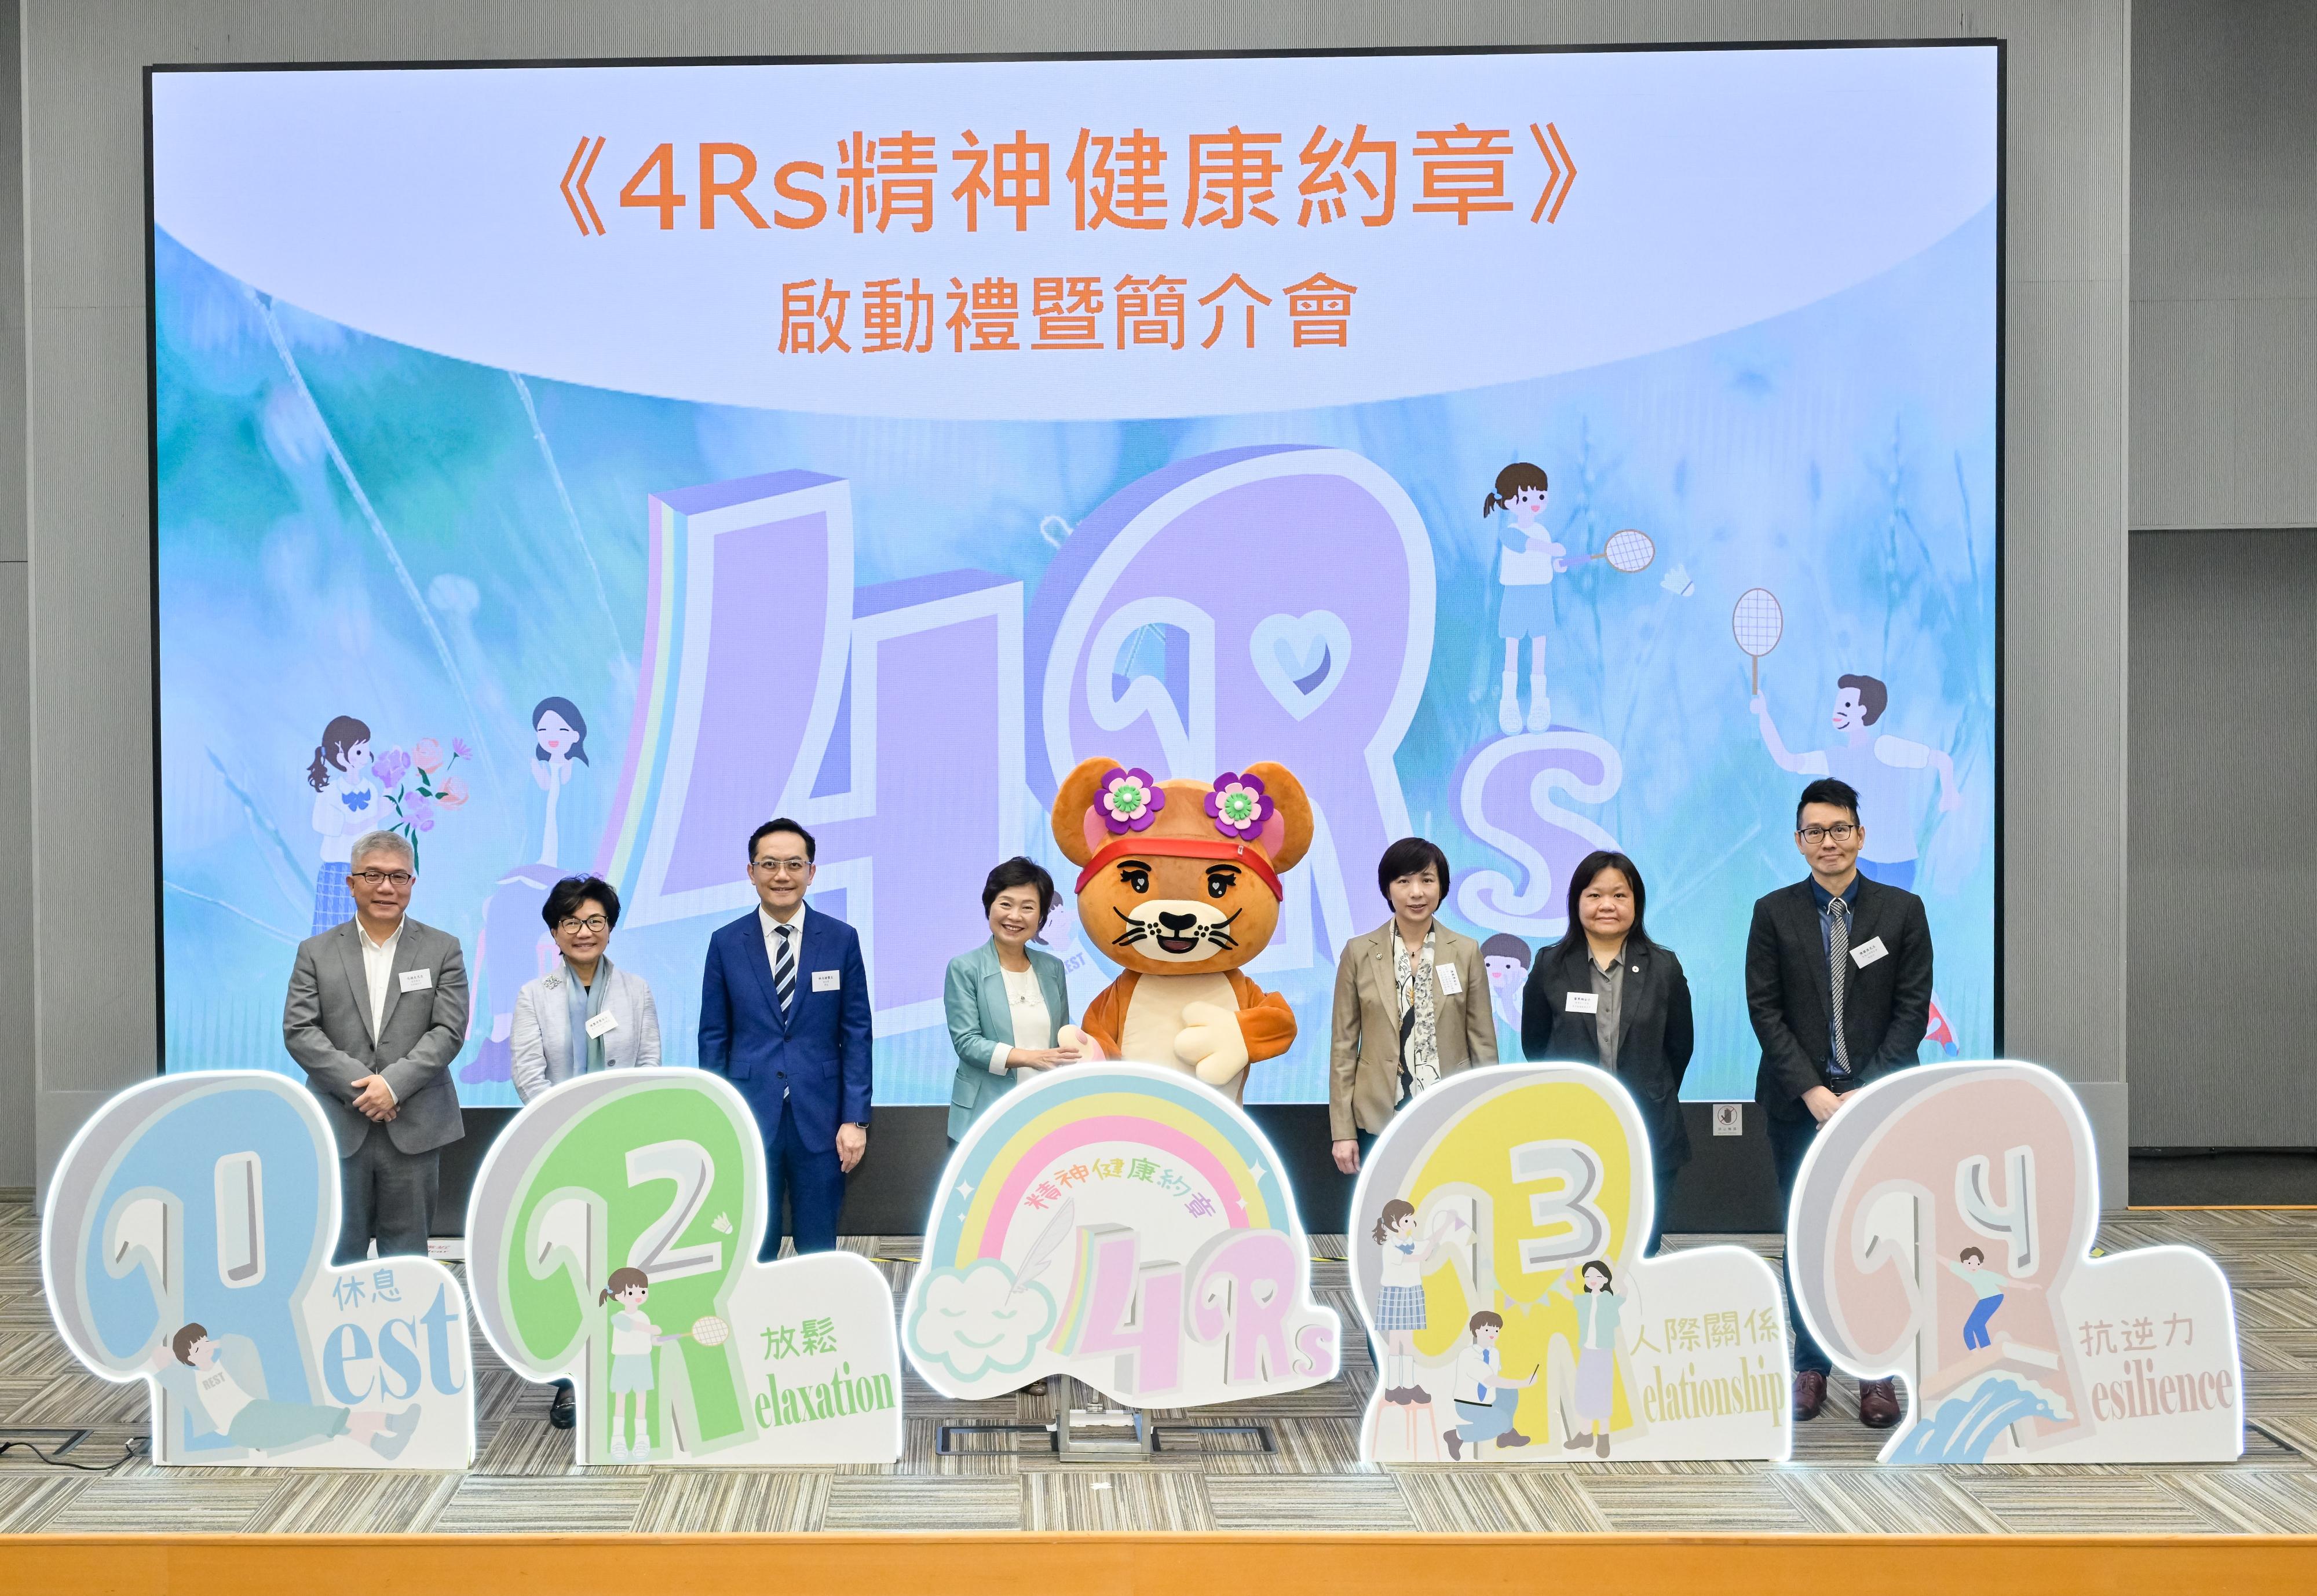 The Secretary for Education, Dr Choi Yuk-lin (fourth left) and the Director of Health, Dr Ronald Lam (third left), officiate at the 4Rs Mental Health Charter Launching Ceremony cum Briefing Session today (April 12) with other officiating guests.